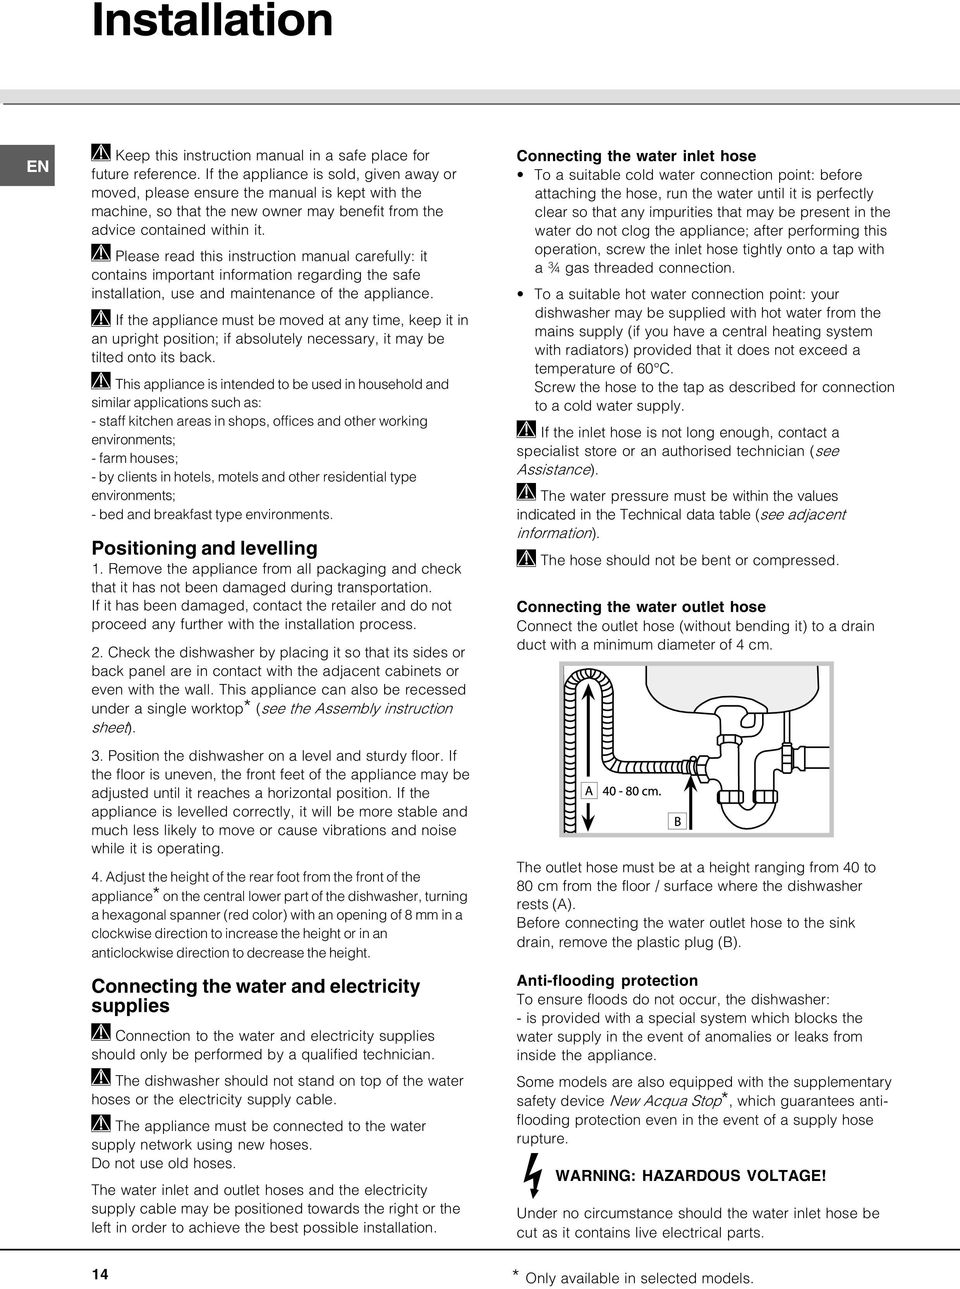 Please read this instruction manual carefully: it contains important information regarding the safe installation, use and maintenance of the appliance.